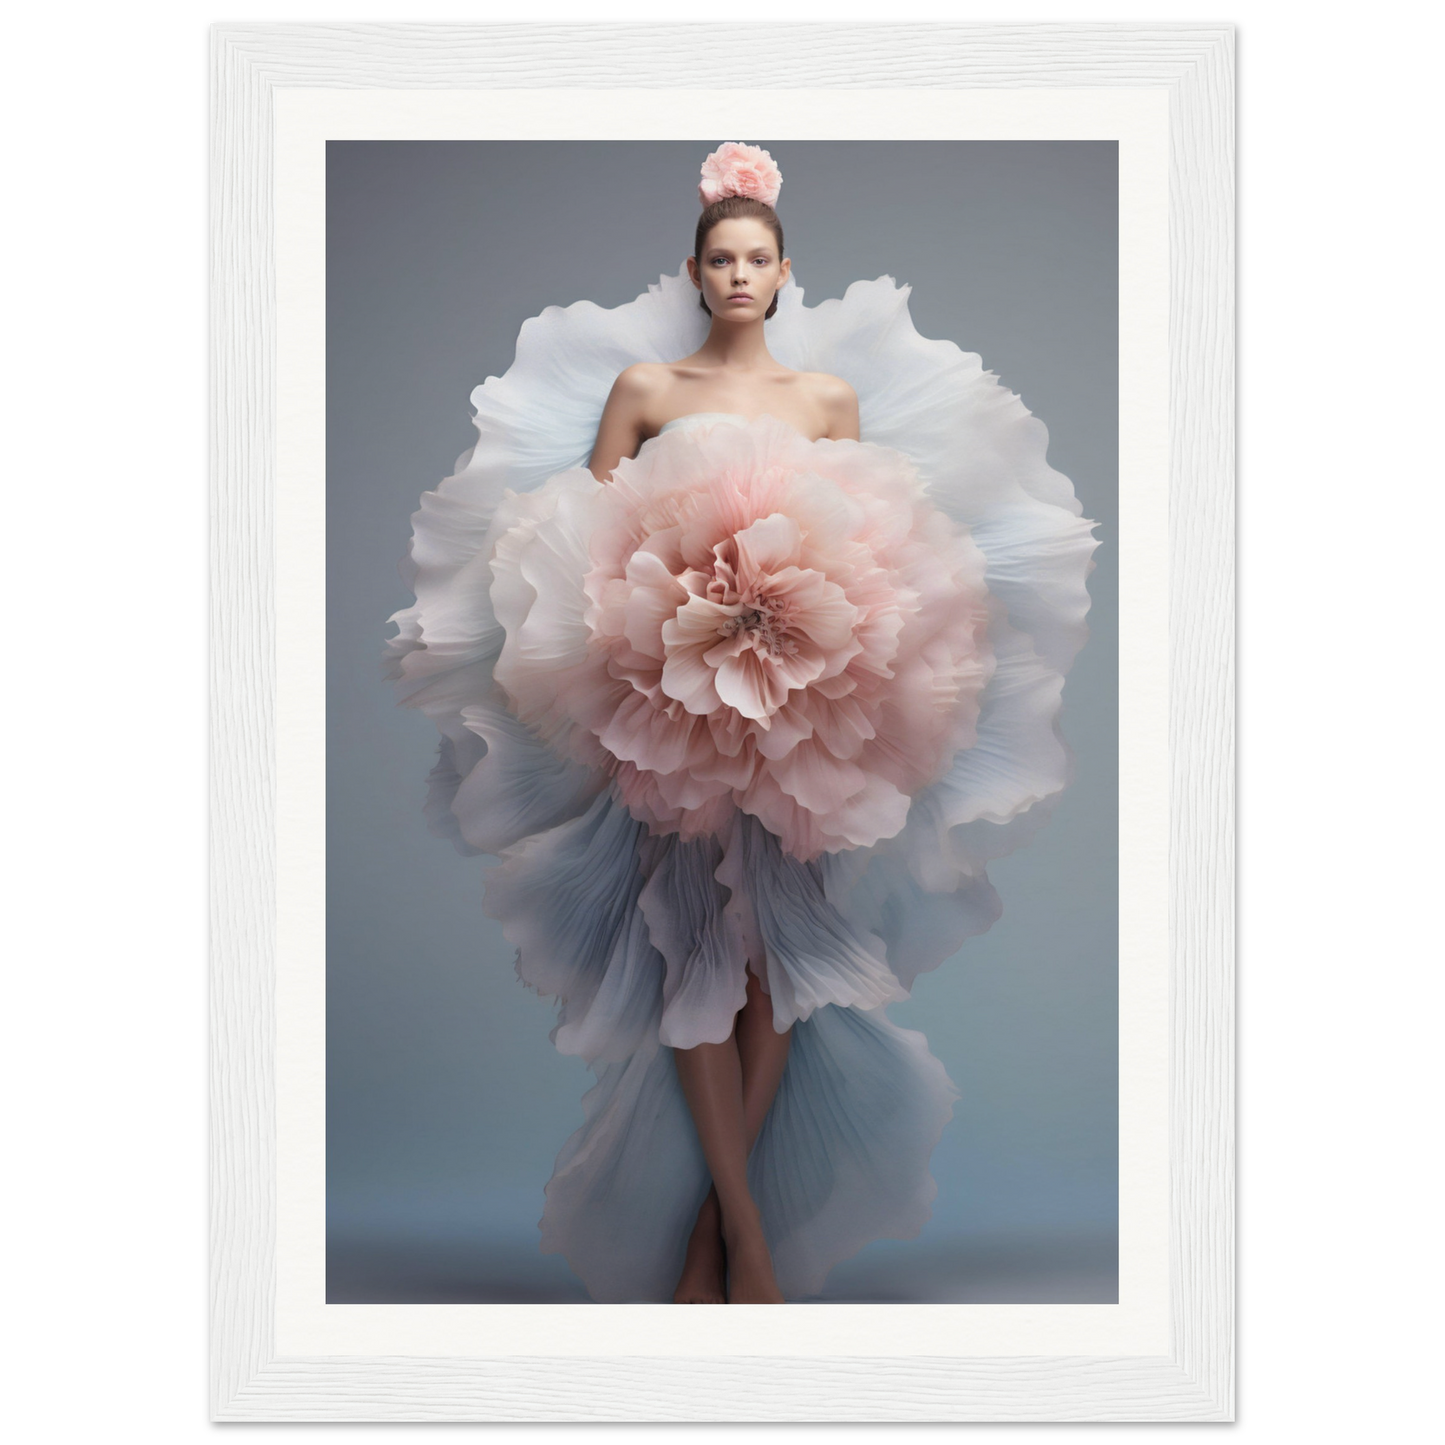 An image of a woman in a dress with a large pink flower, perfect as Fragments of Forever The Oracle Windows™ Collection to transform your space.